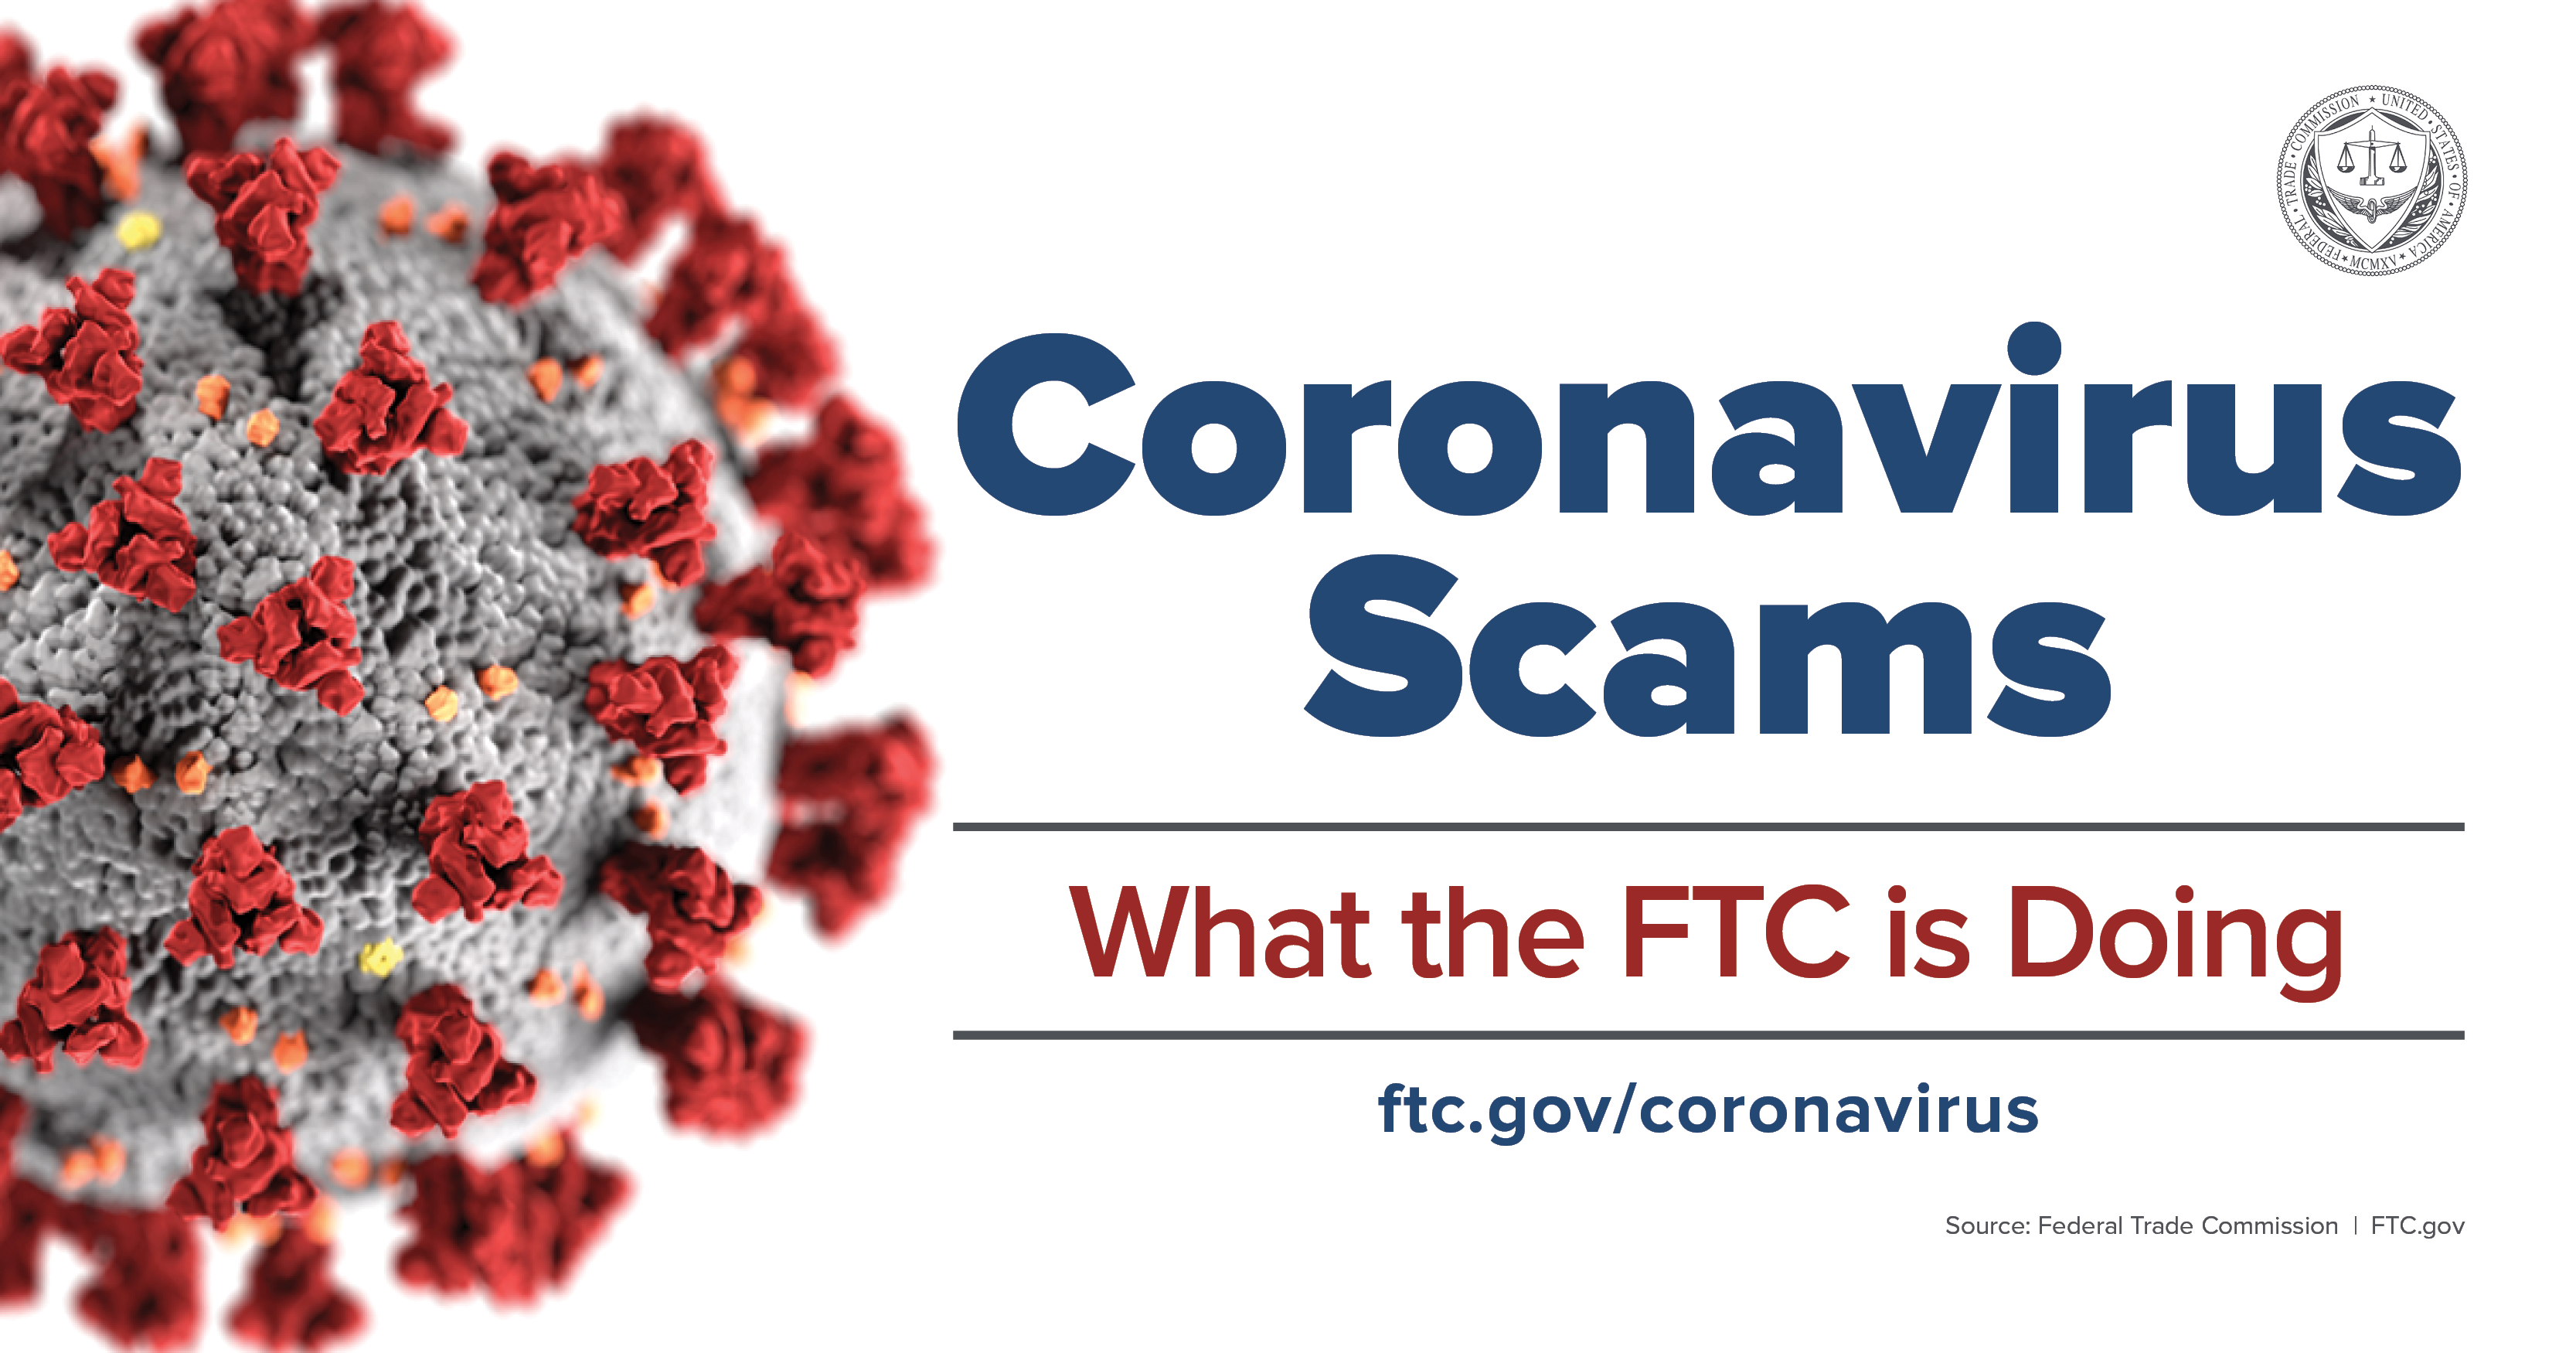 Coronavirus Scams: What the FTC is Doing